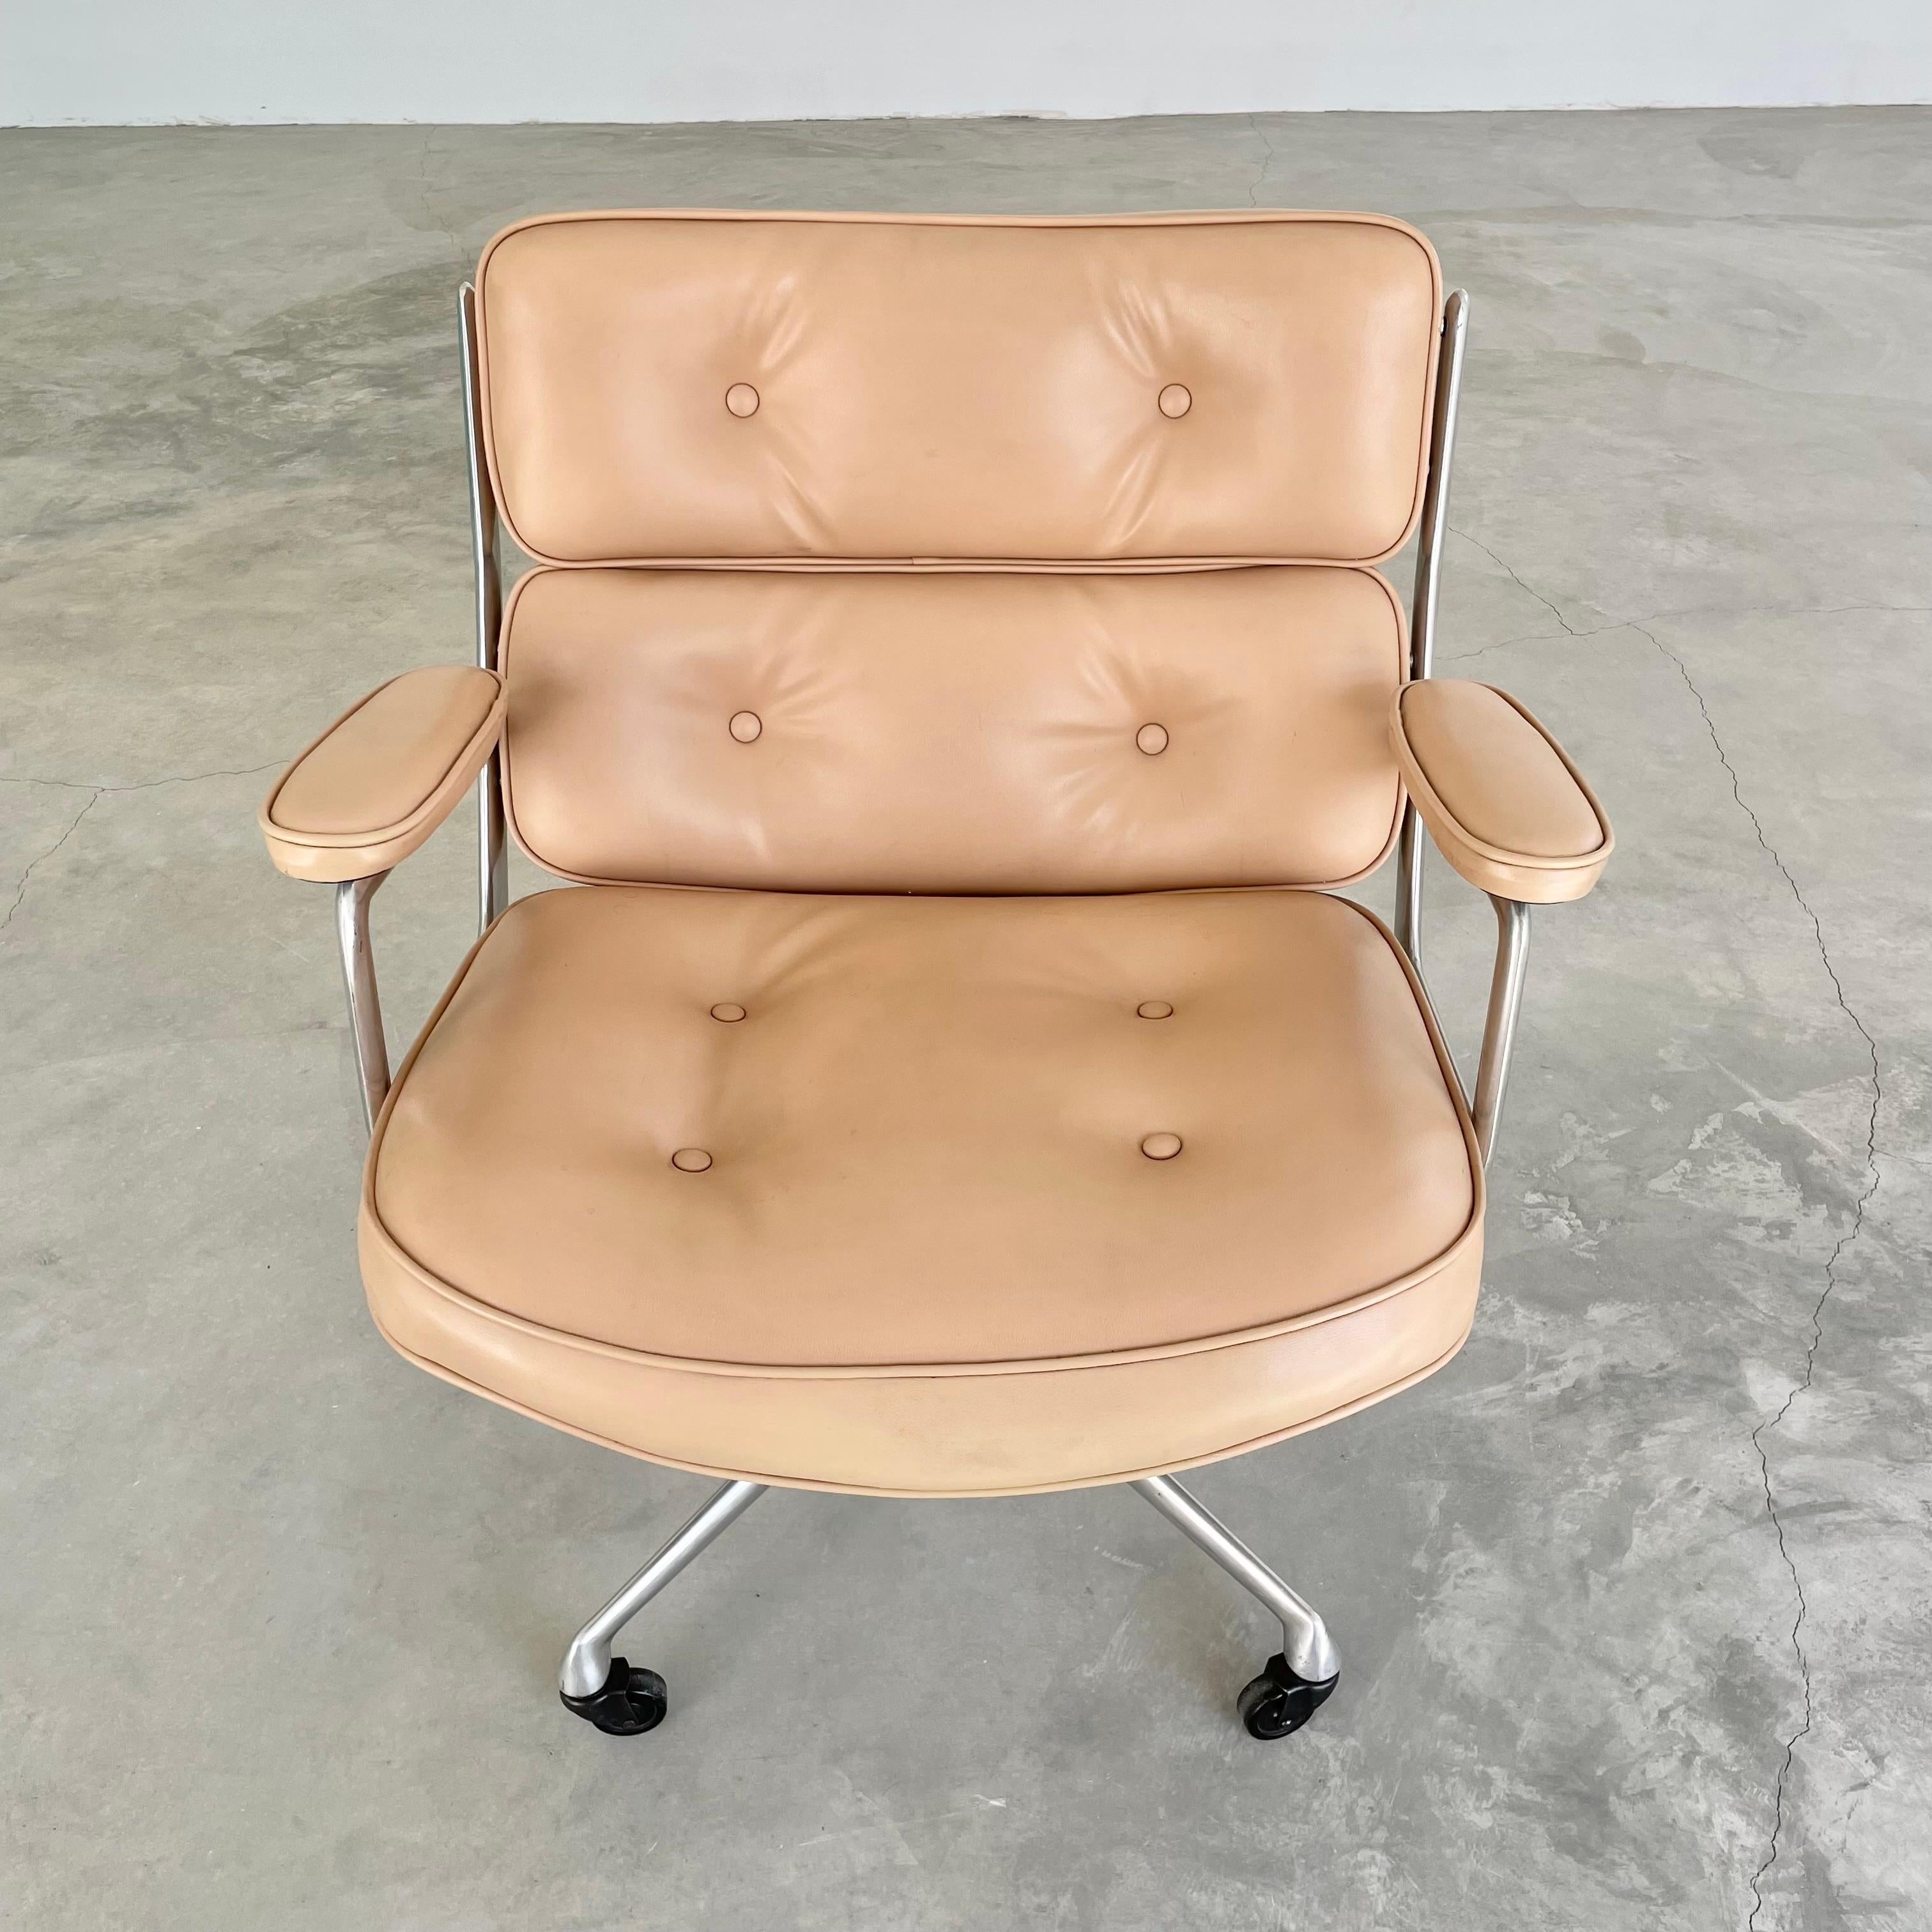 North American Vintage Eames Time Life Lobby Chair in Camel